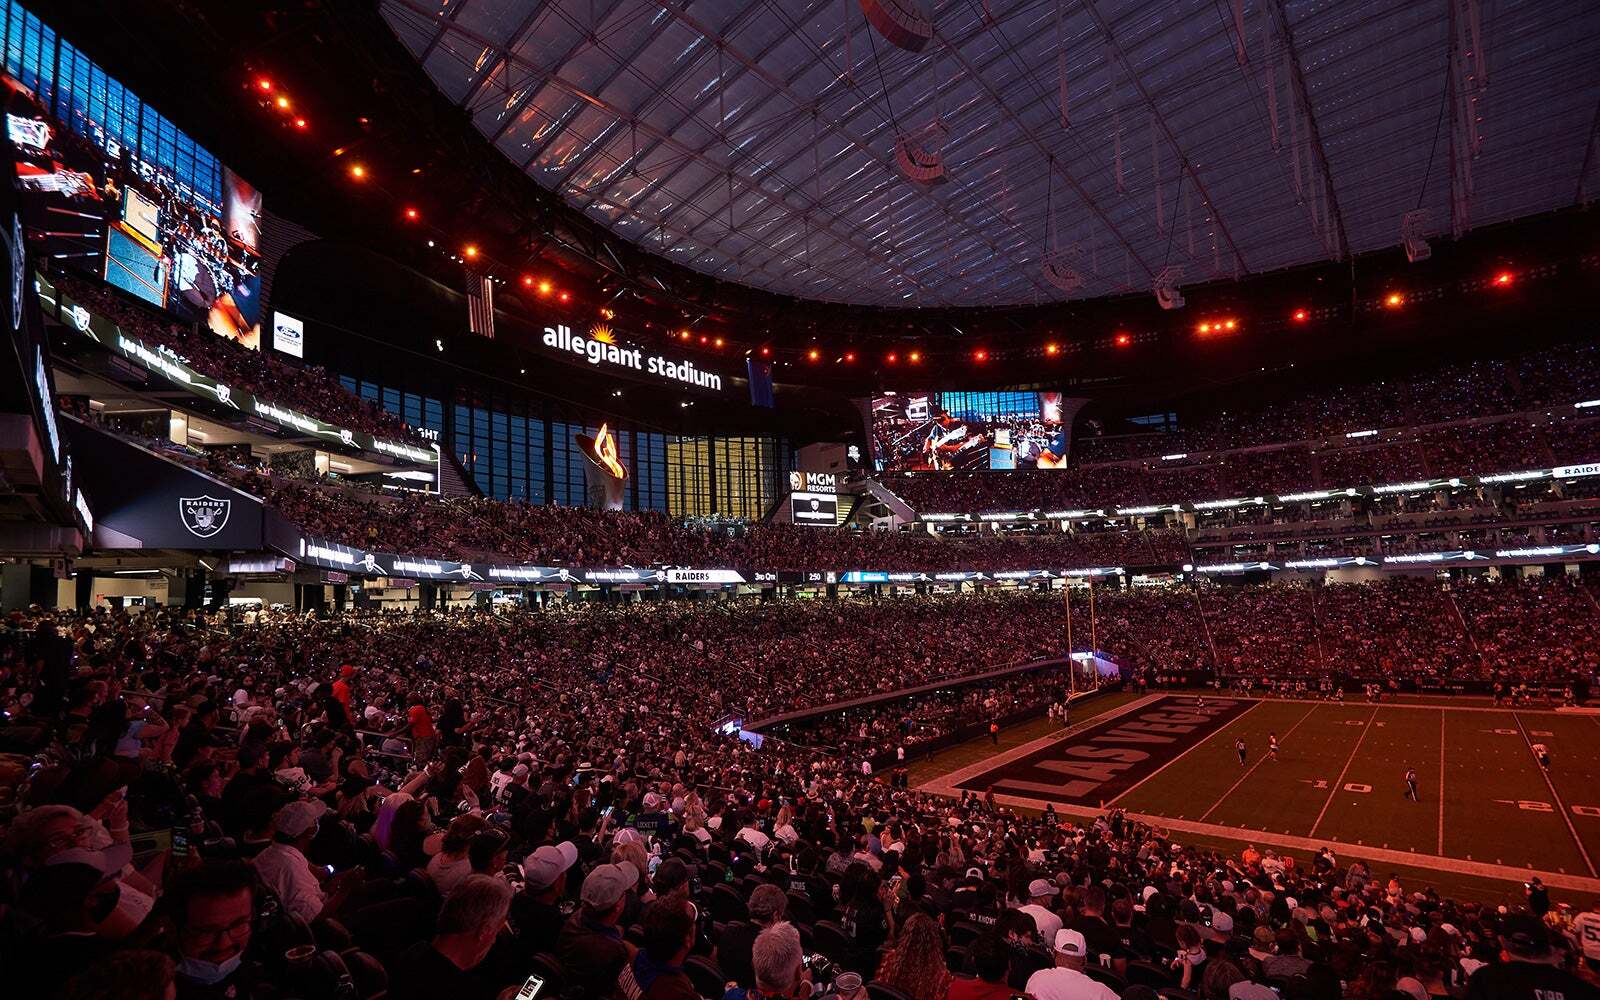 T-Mobile has improved data speeds inside Allegiant Stadium in time for the Super Bowl - T-Mobile hikes its peak 5G download data speeds 10x for fans attending the Super Bowl